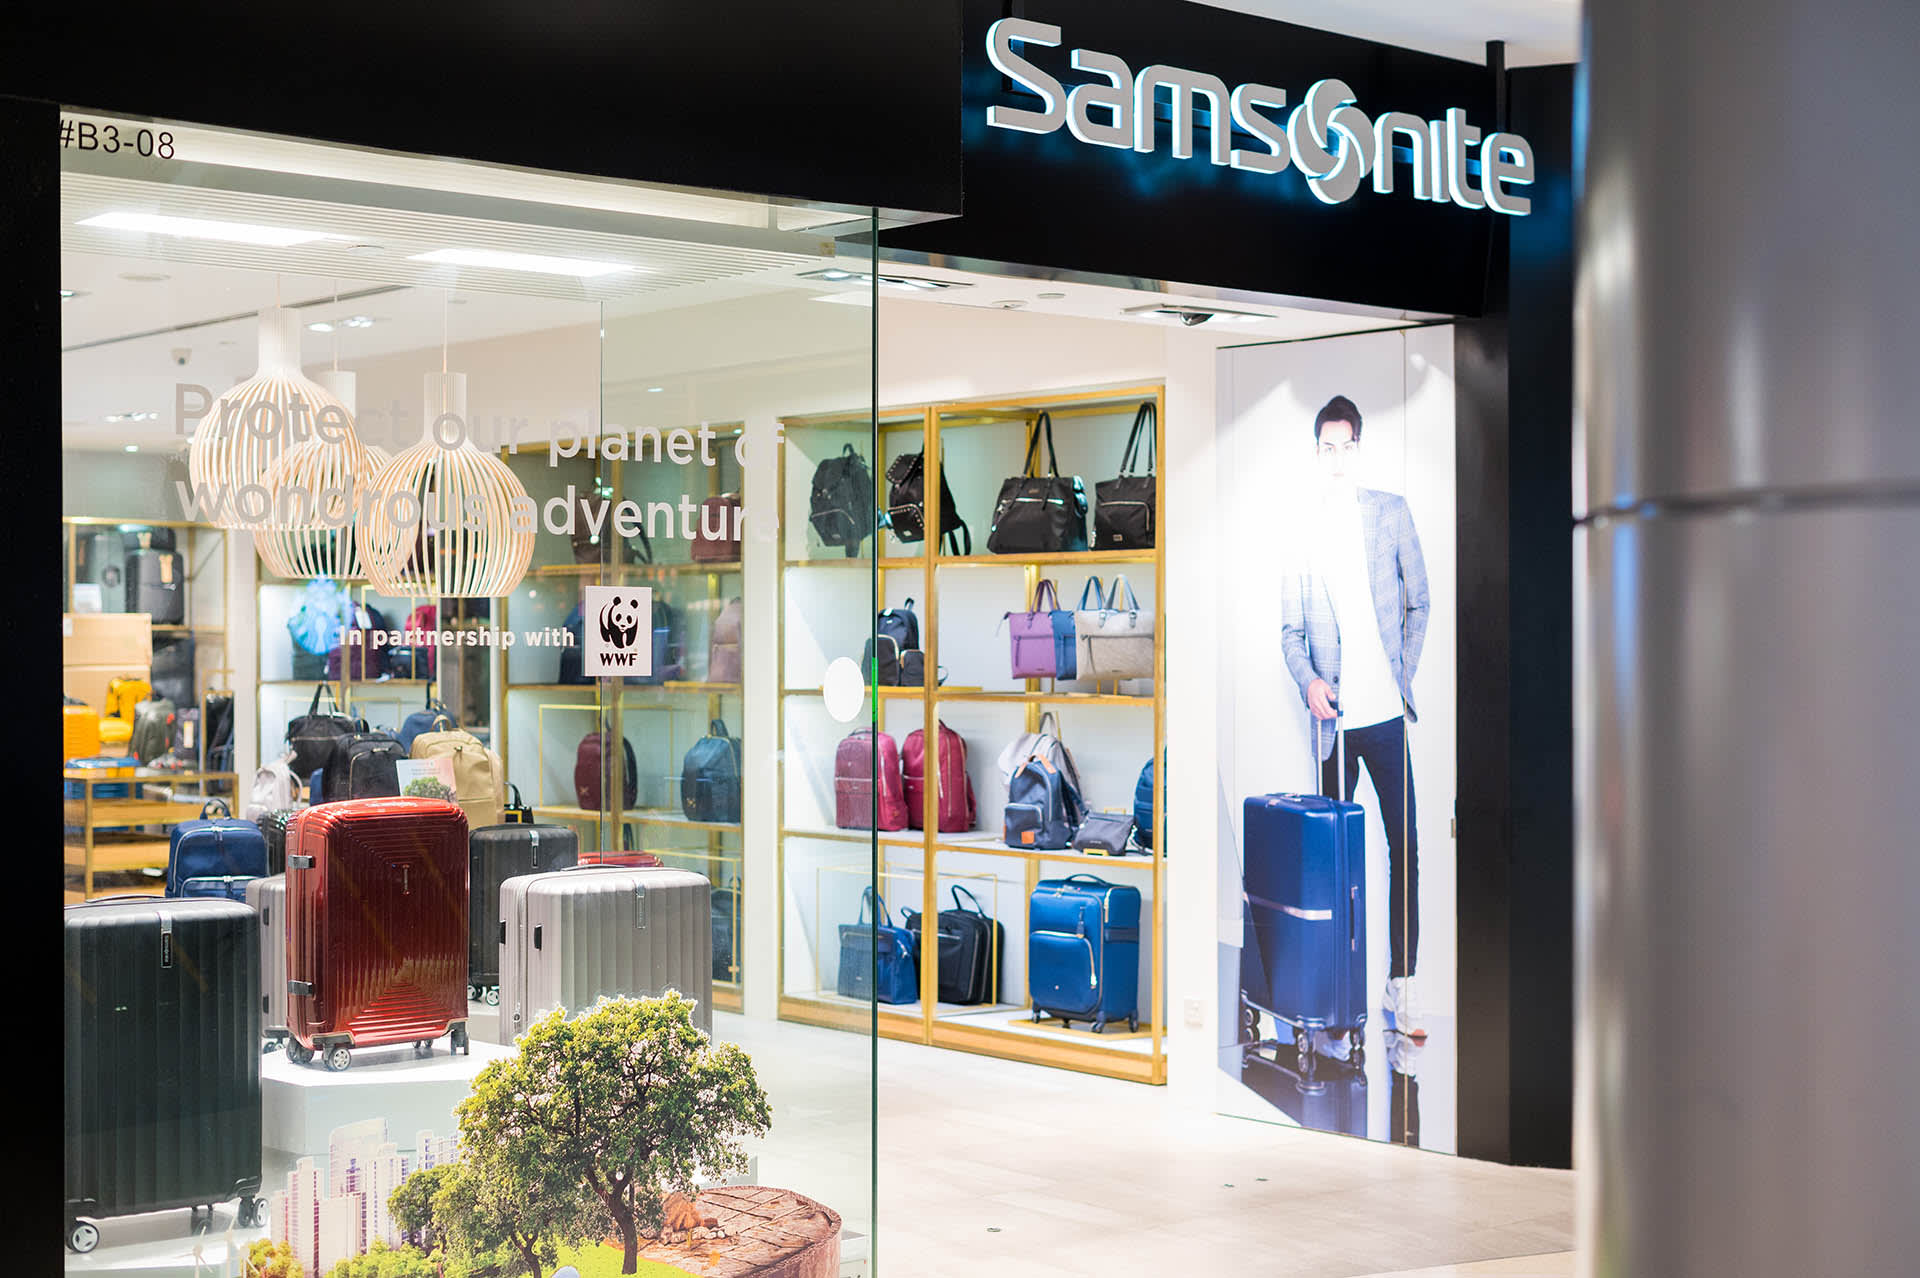 You Can Now Trade In Any Used Luggage For 40% Off Selected Samsonite Luggage — And It’s For A Good Cause